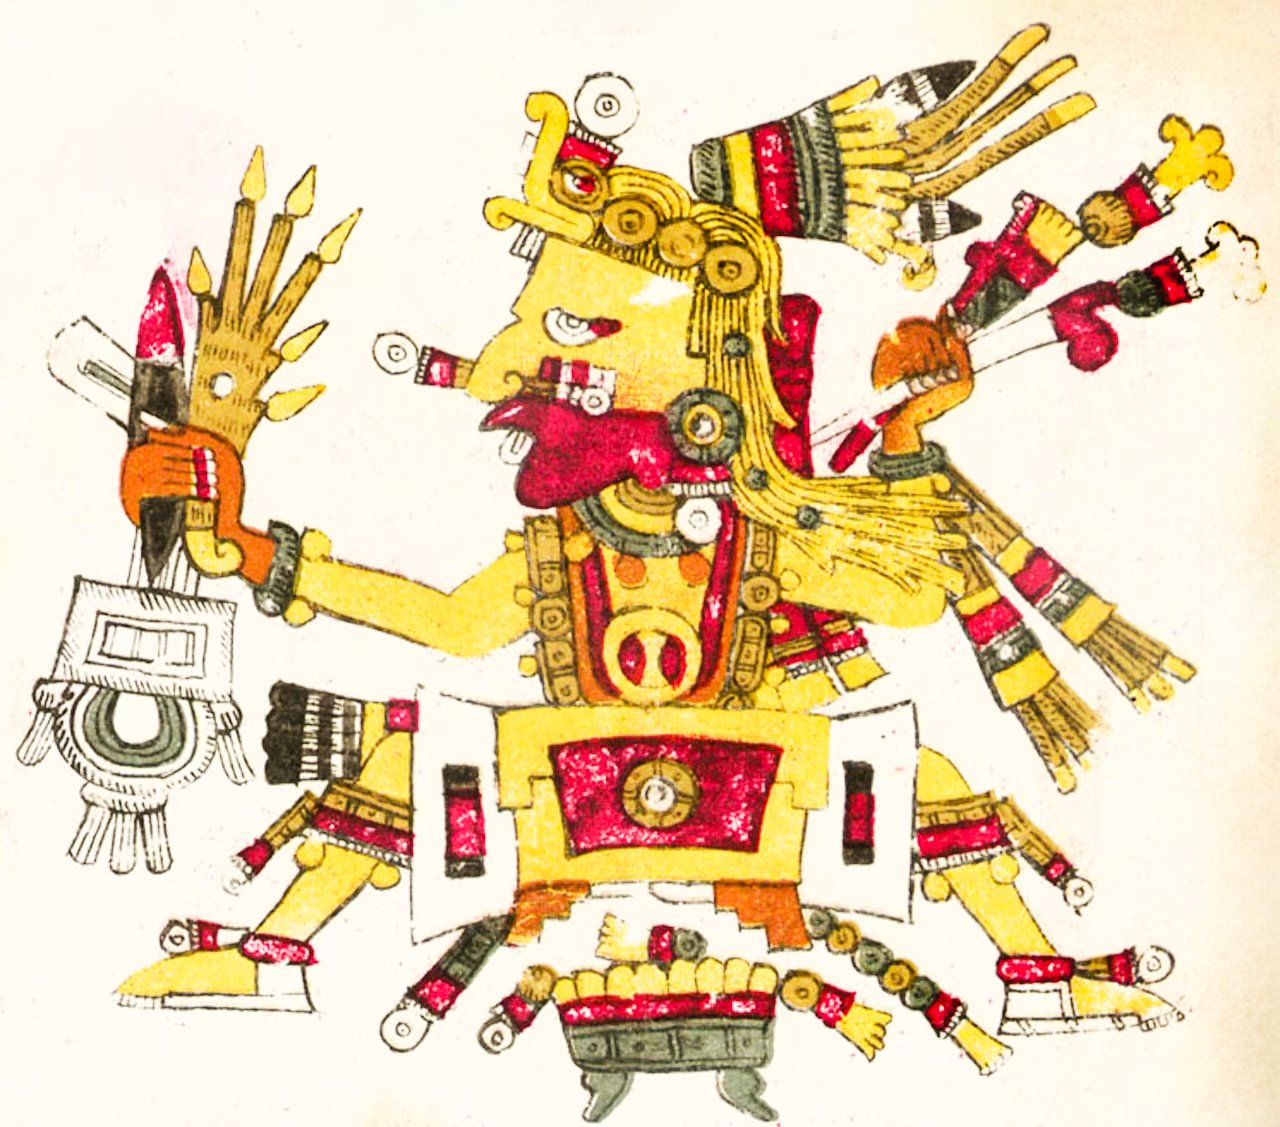 A vibrant illustration from the Borgia Codex depicting Ometeotl, also known as Ometecuhtli and Tonacatecuhtli, adorned in intricate gold, red, and white garments and accessories, with symbols and ceremonial objects in hand.